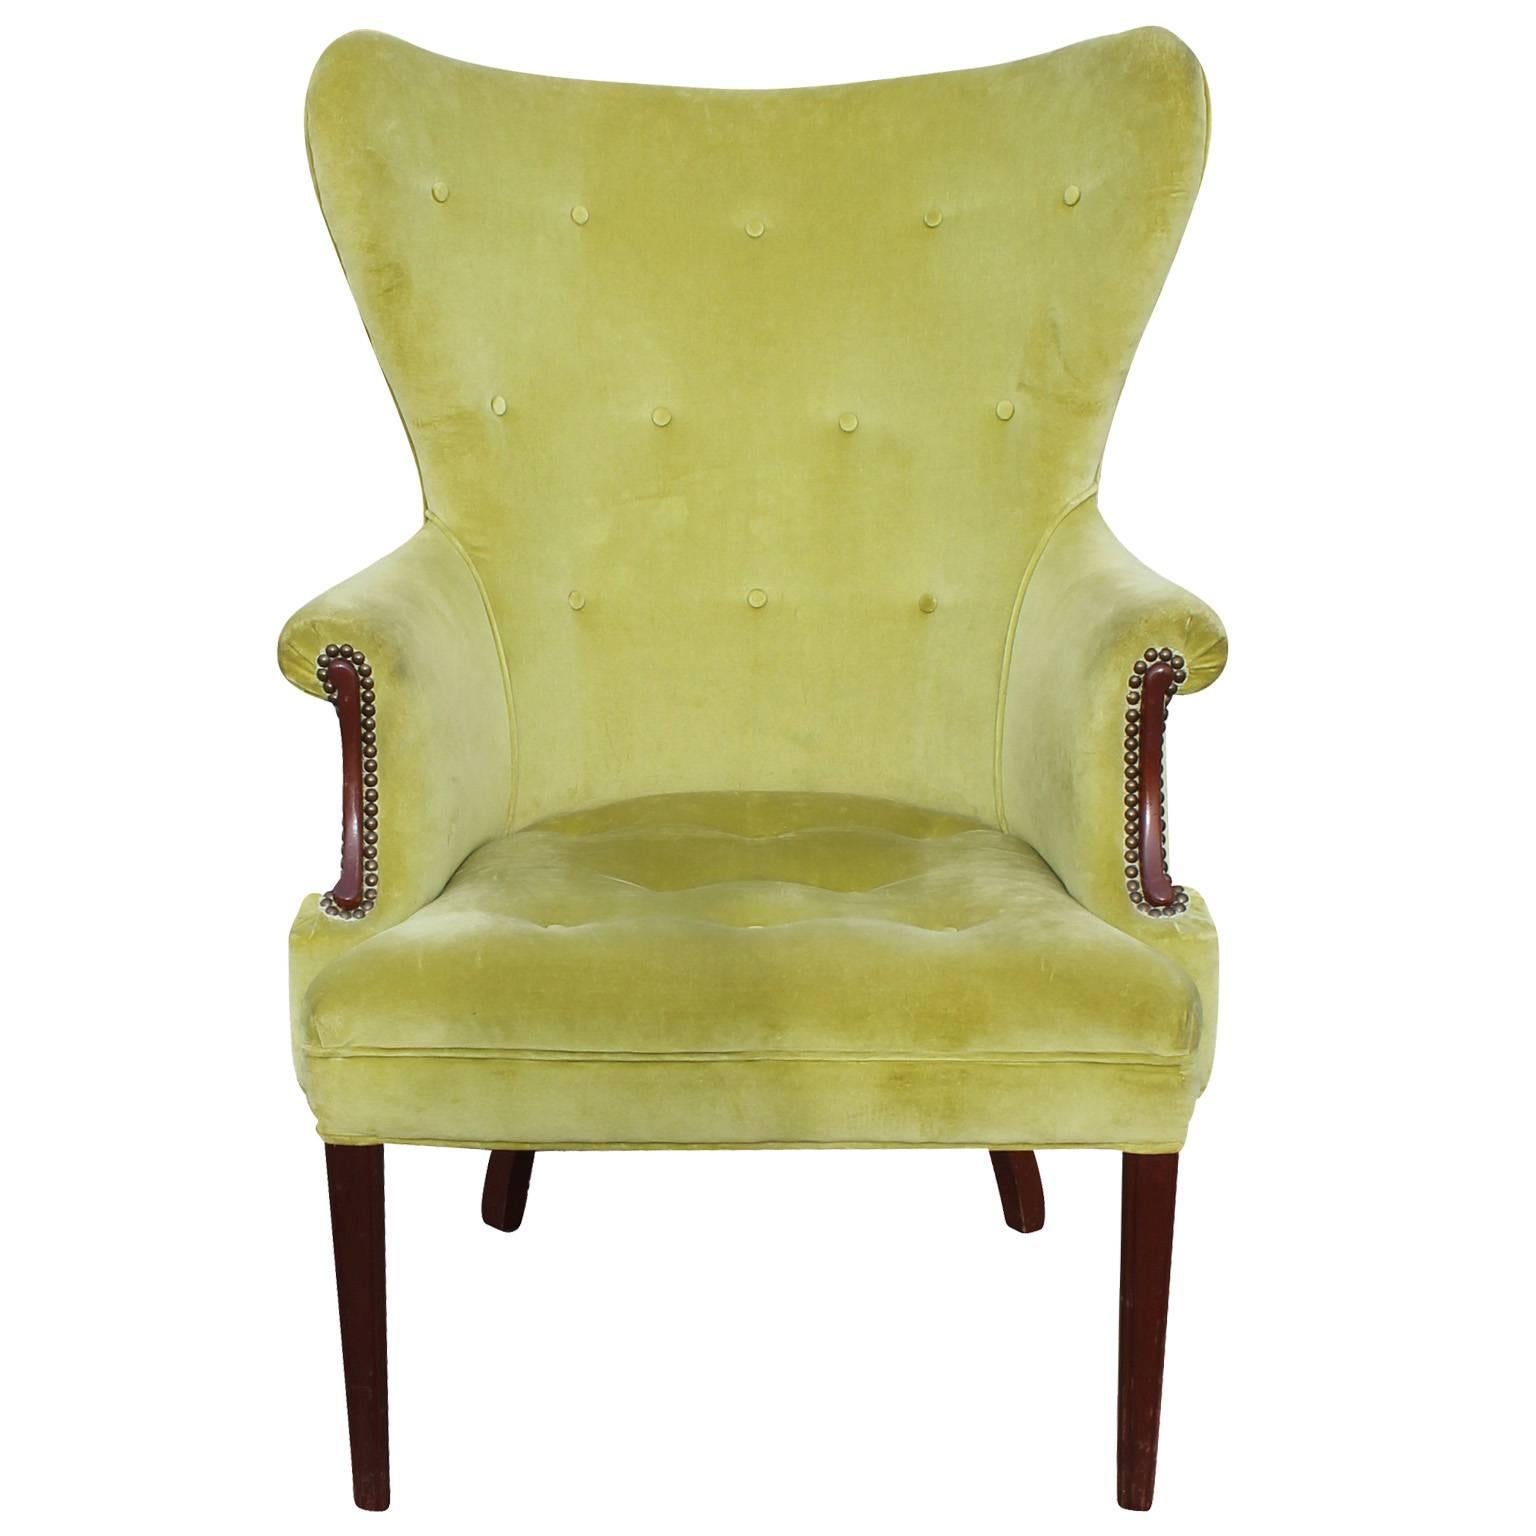 Striking pair of Mid-Century / Regency wingback chairs. Chairs have playful lines-ultra curvy and leggy. Brass tacks and walnut inserts adorn the arms. Chairs are upholstered in original chartreuse velvet which needs re upholstery.